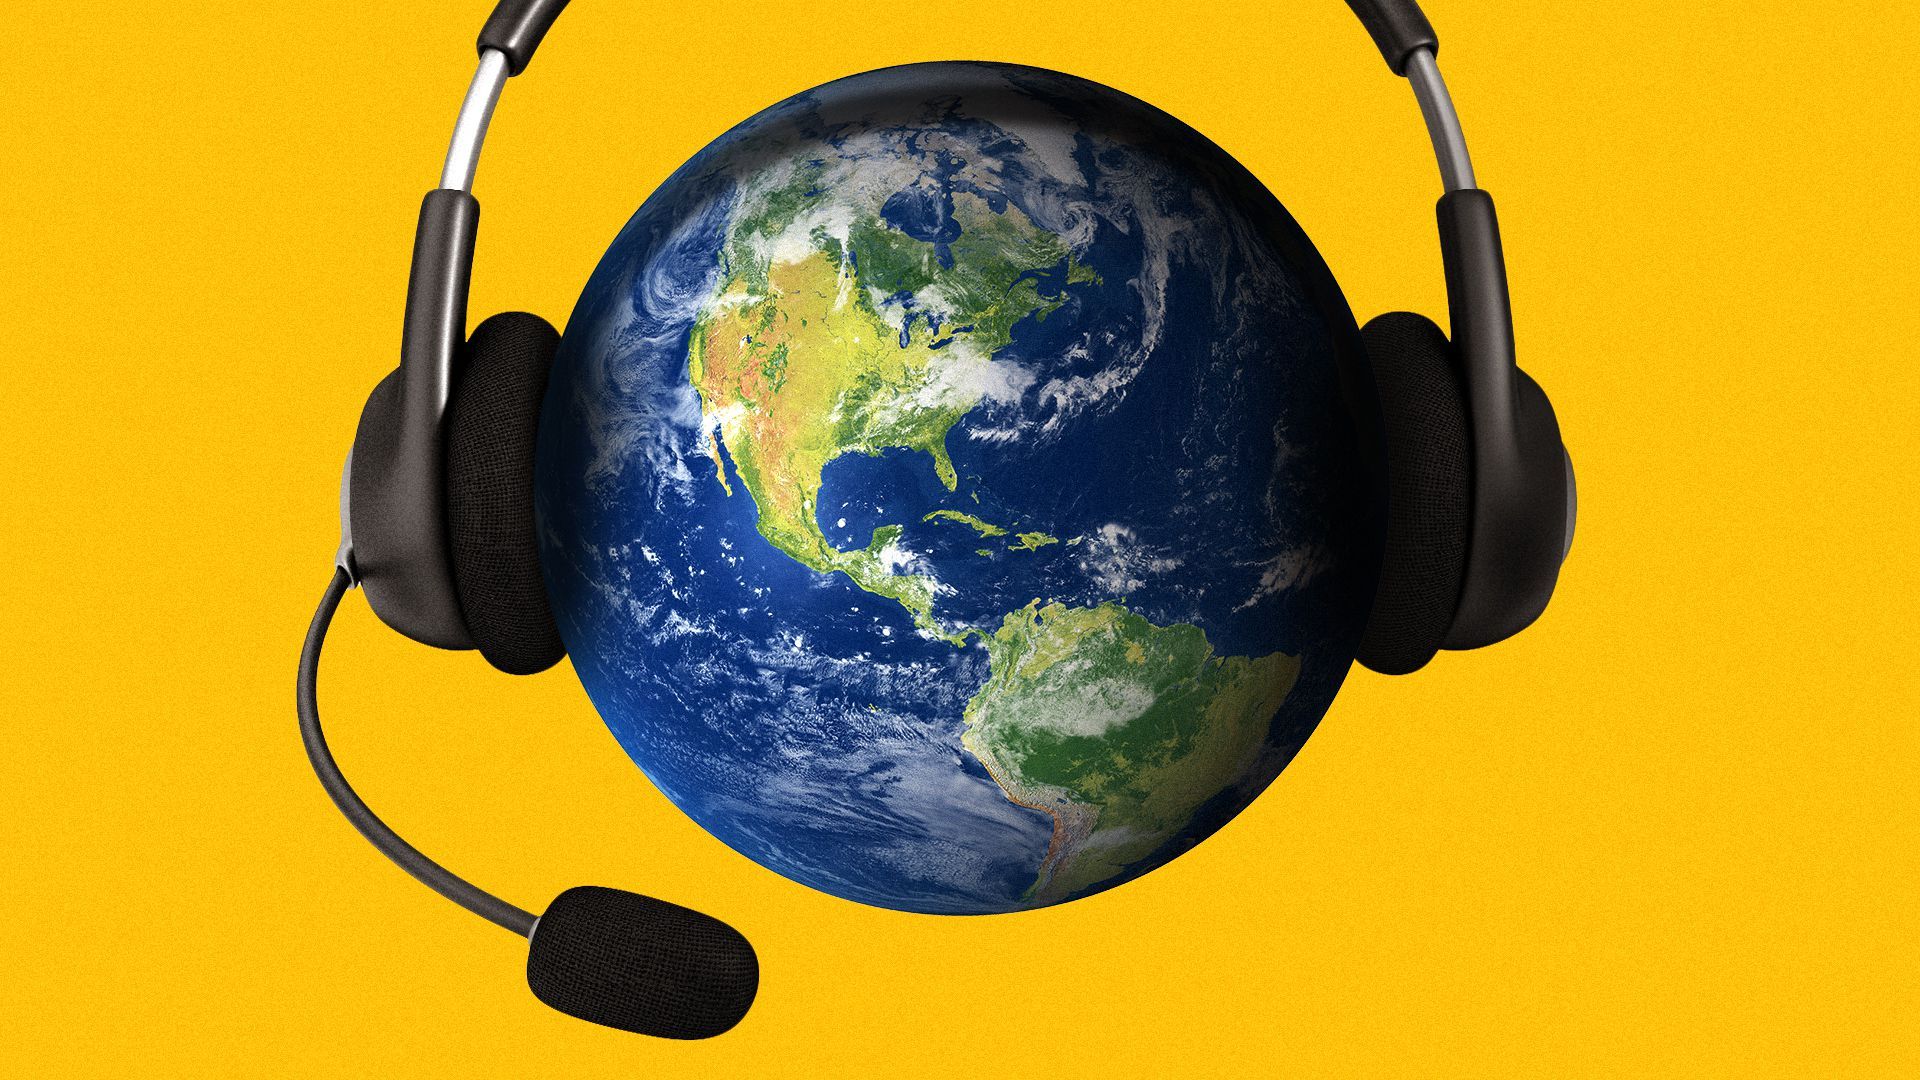 Illustration of the earth wearing a headset.